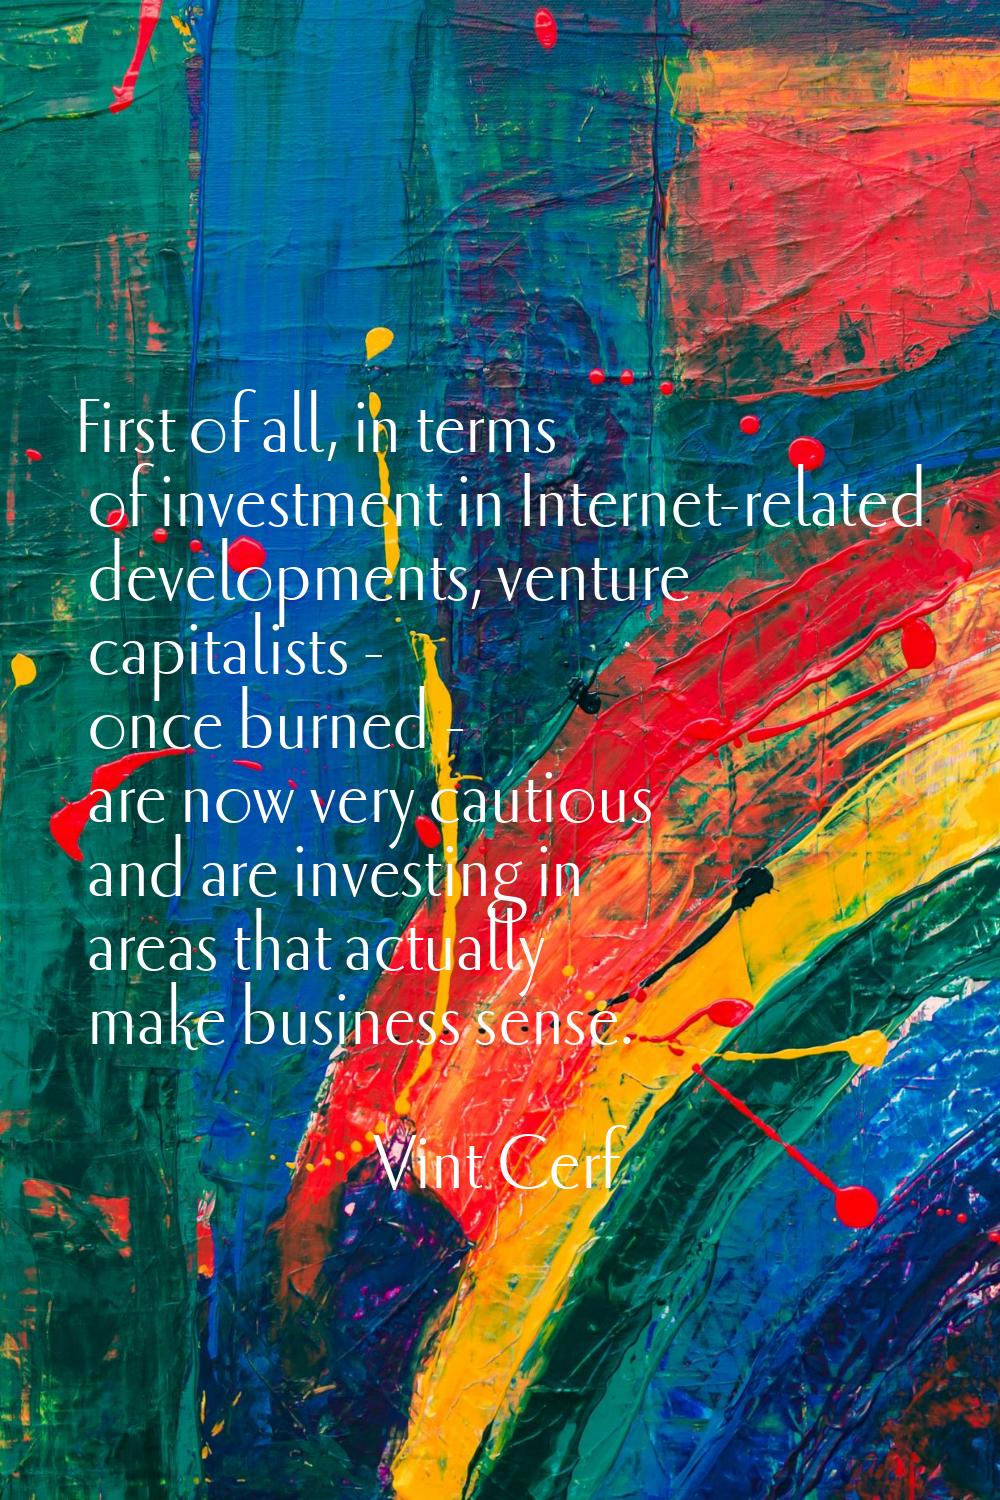 First of all, in terms of investment in Internet-related developments, venture capitalists - once b